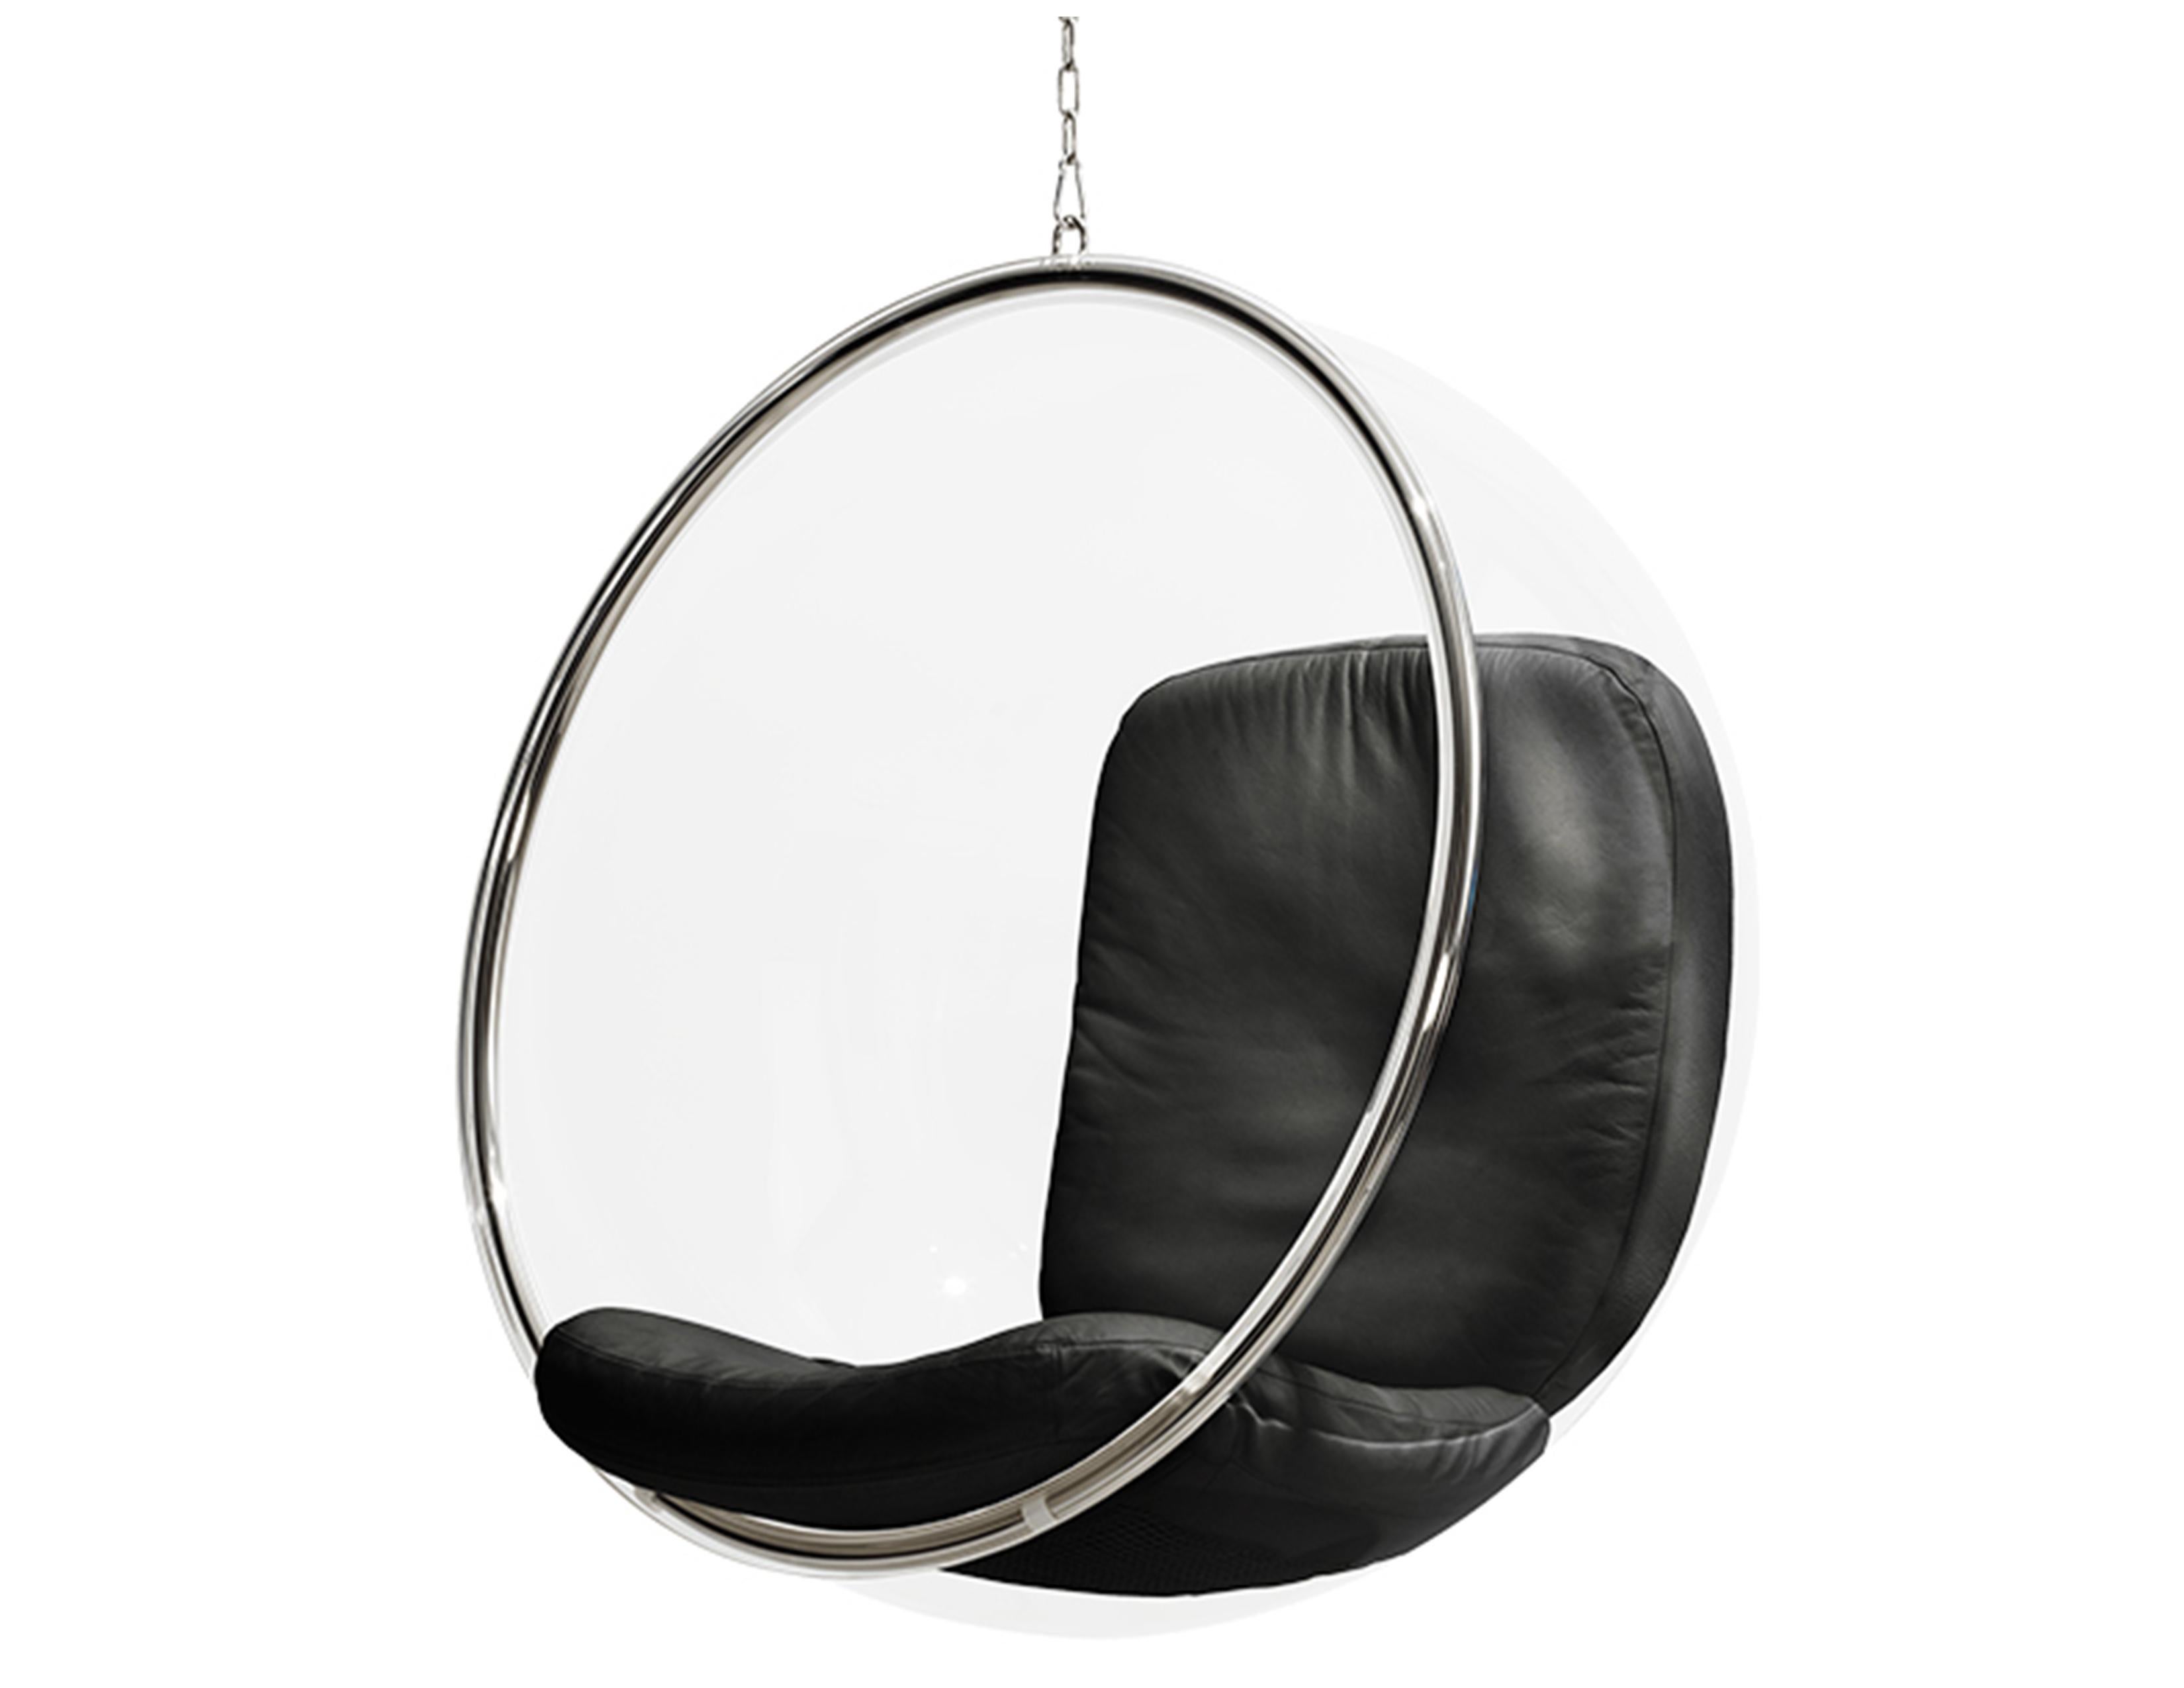 The bubble chair was designed by Eero Aarnio in 1968. According to Eero’s notes, the bubble hangs from the ceiling because ‘there is no nice way to make a clear pedestal.’ It shares the same unique acoustics as the ball chair, a little cocoon that